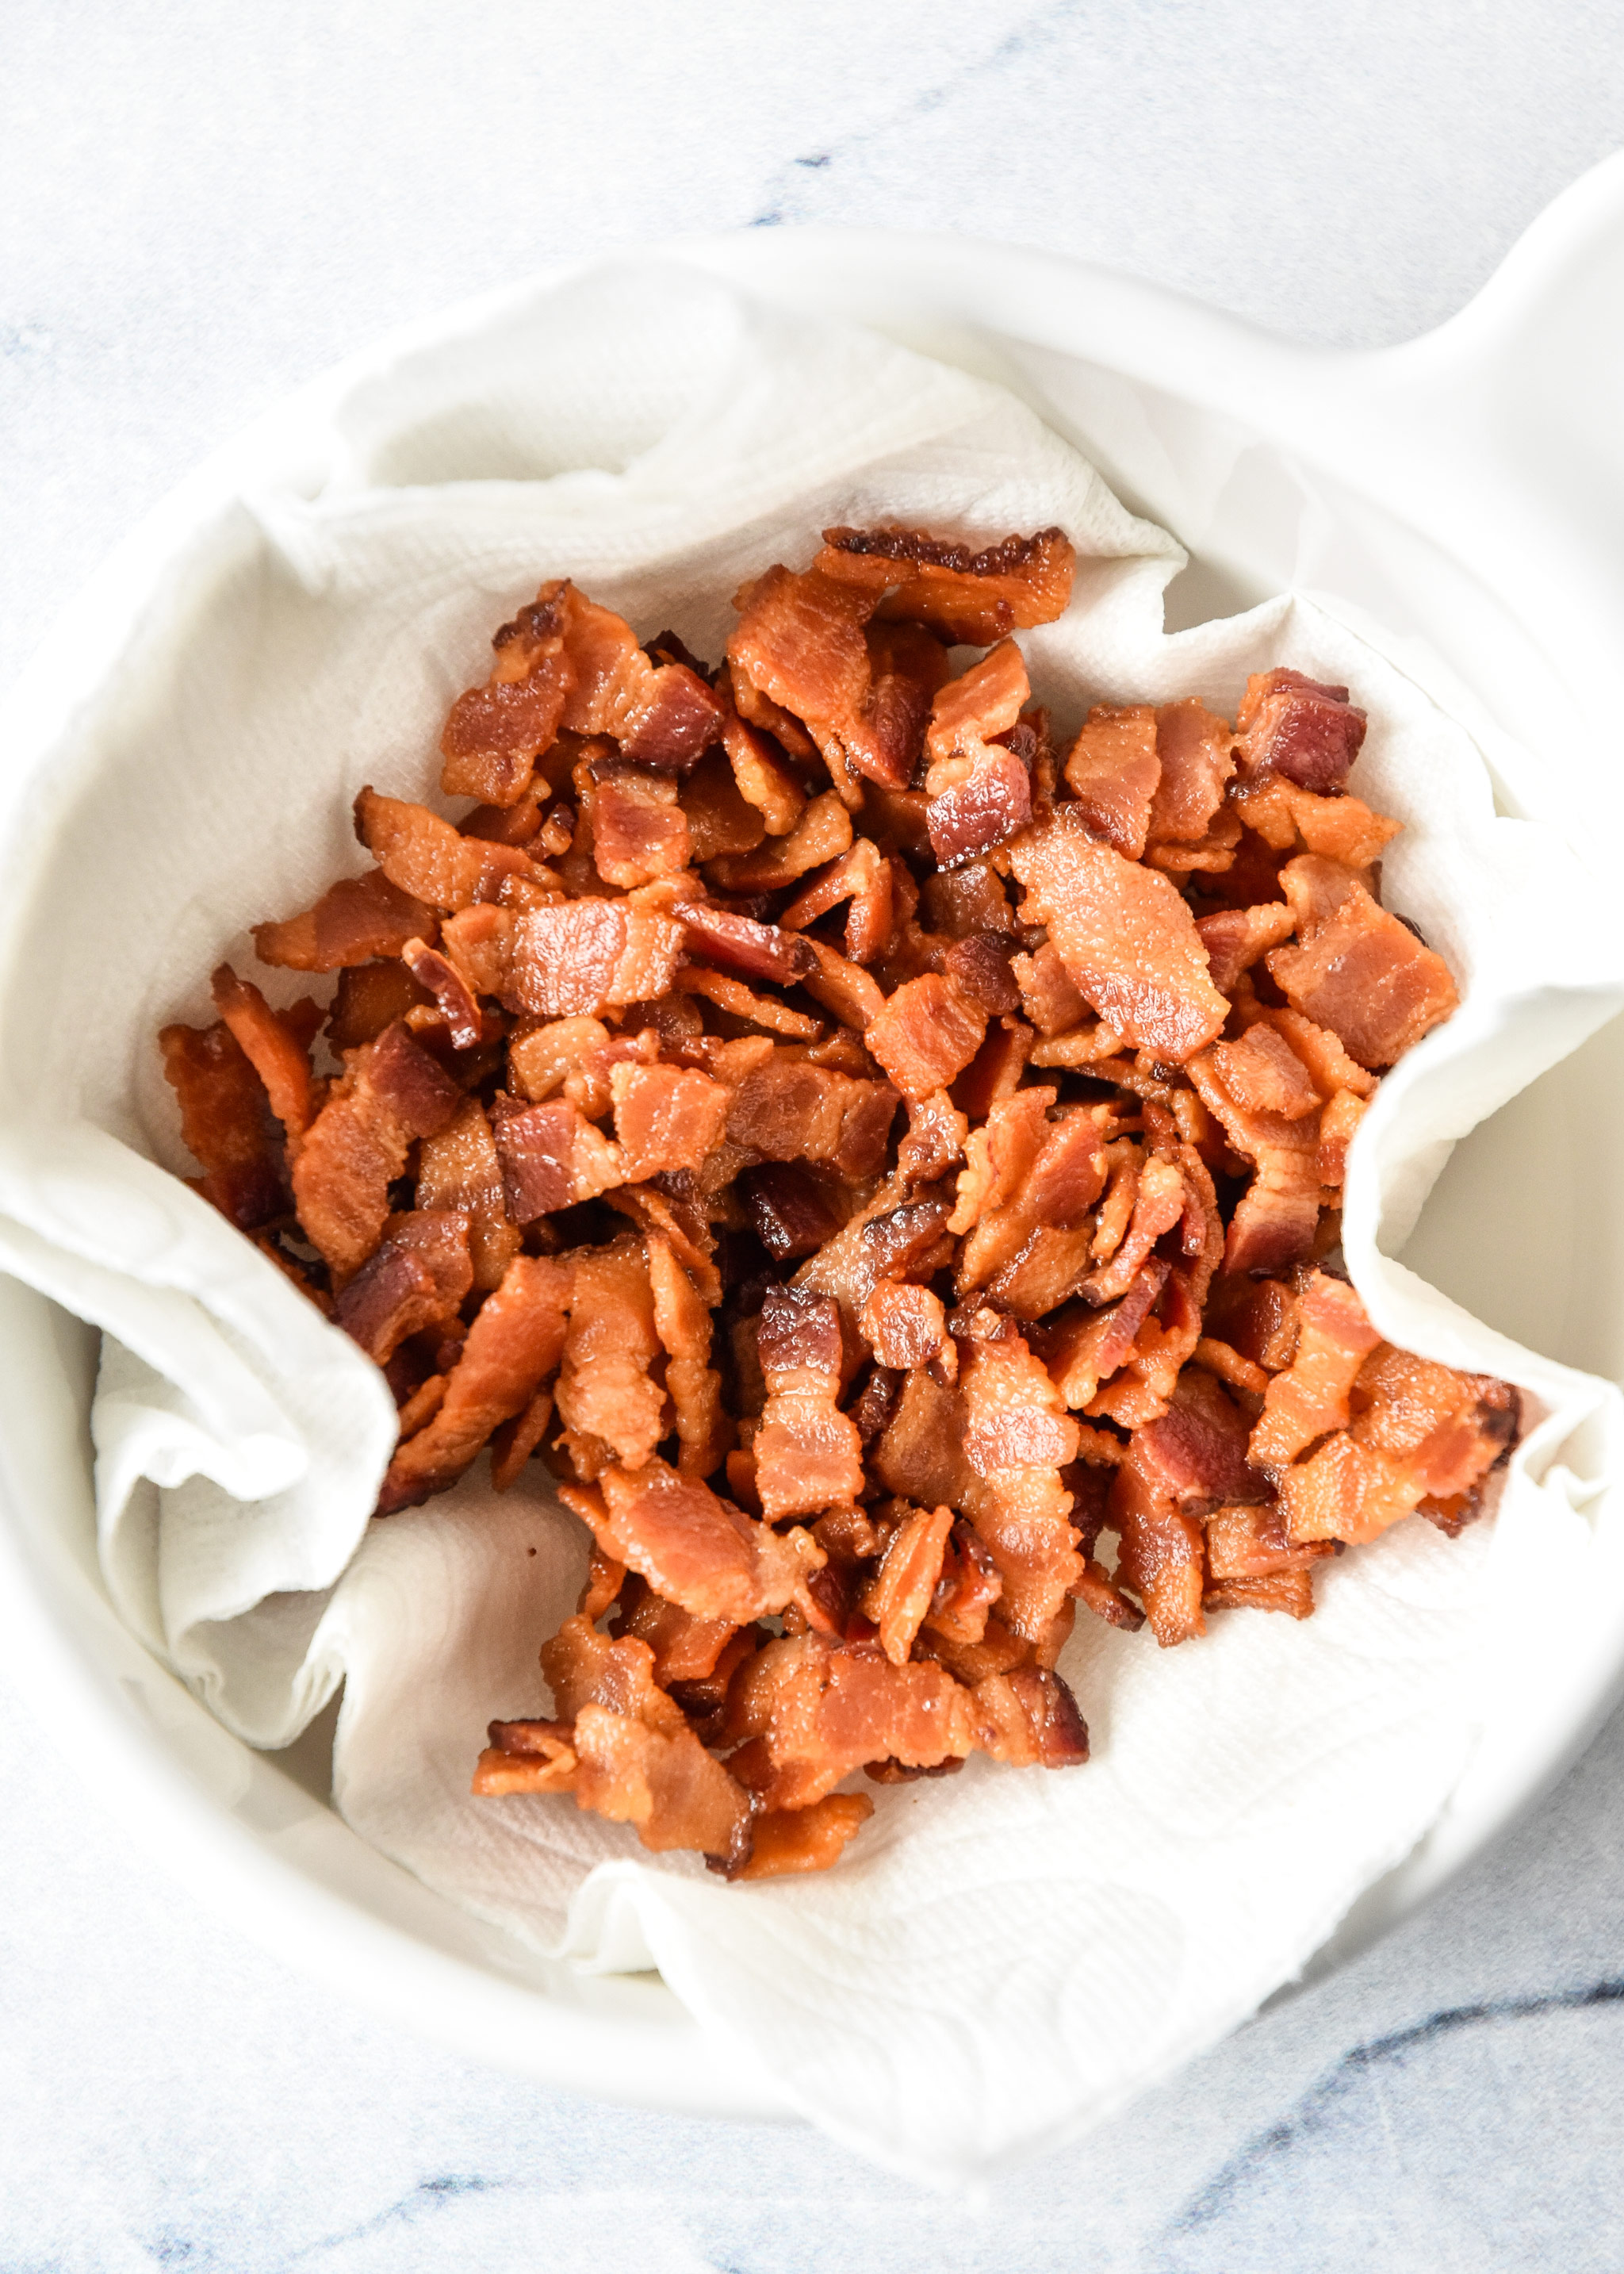 homemade bacon bits made on the stovetop